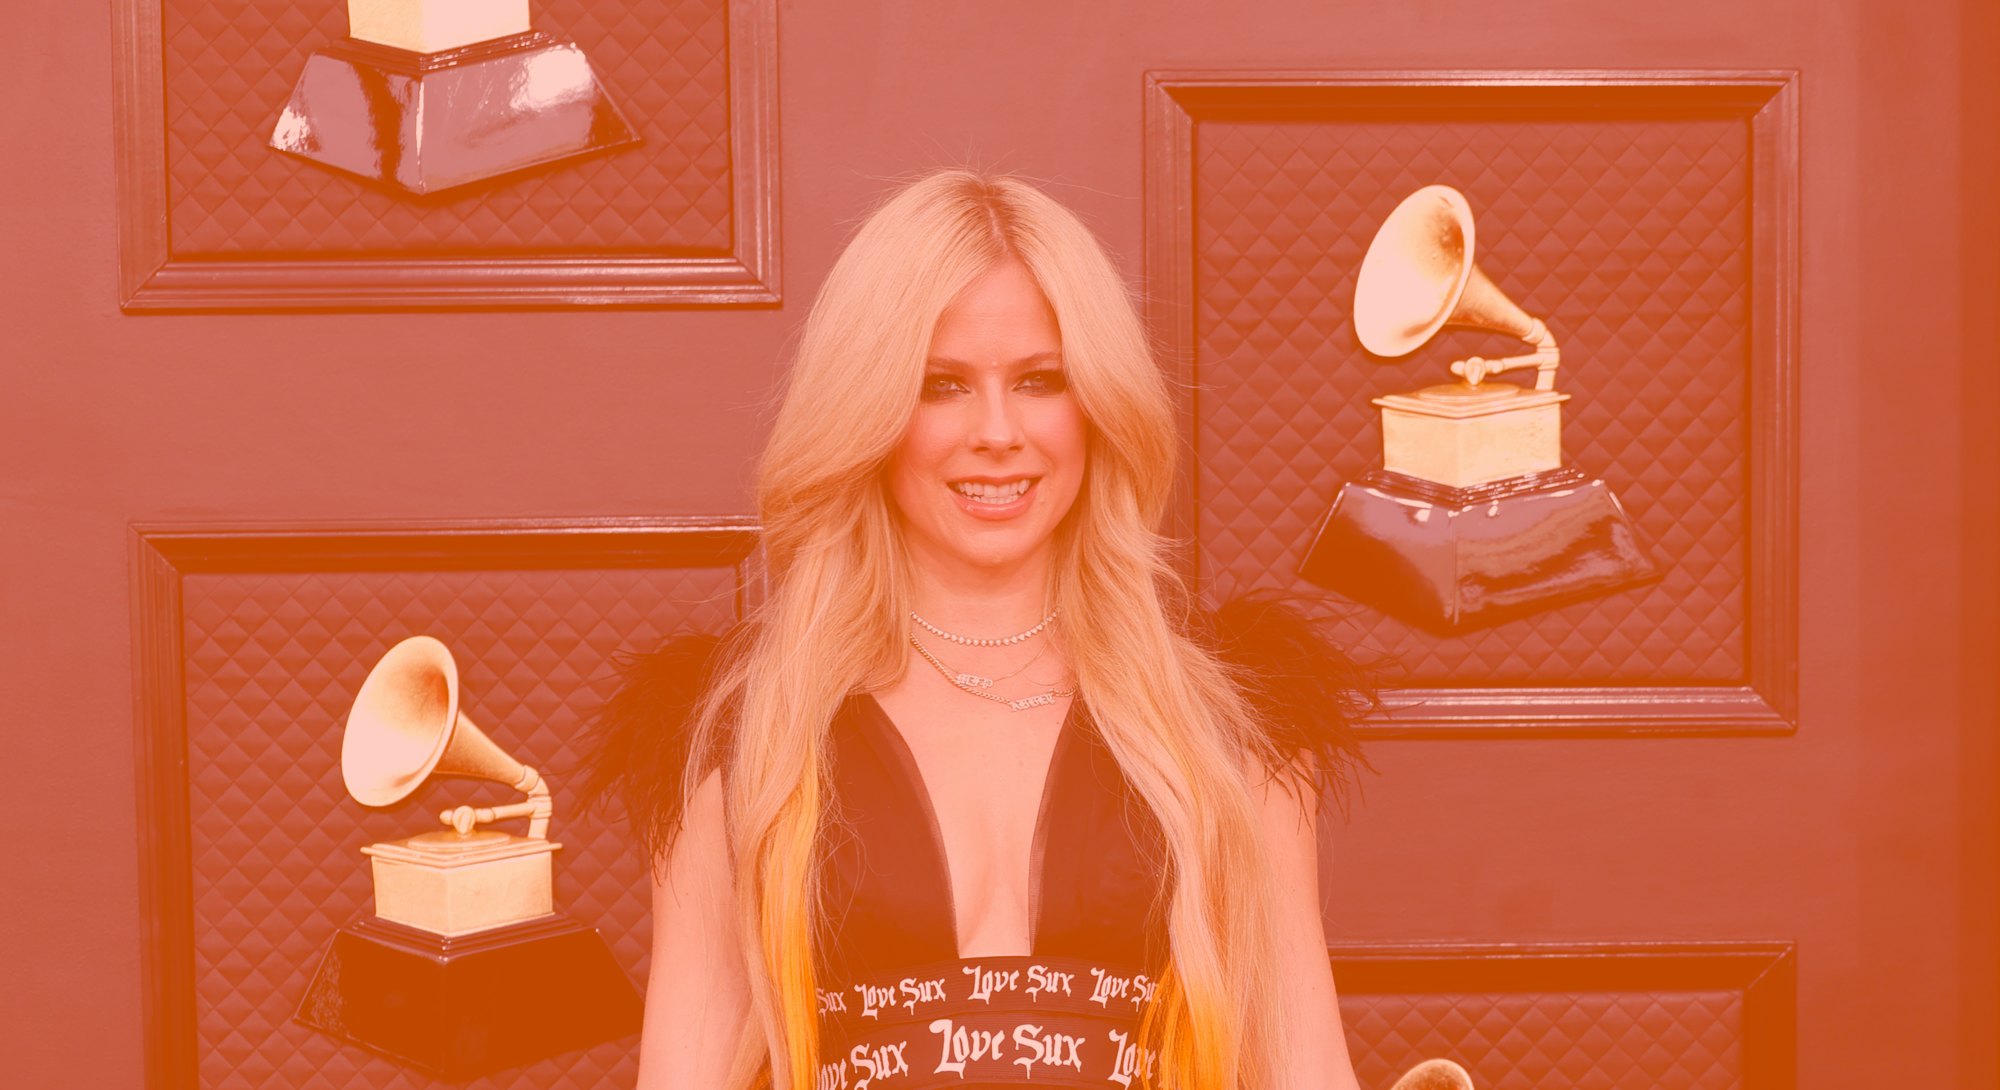 LAS VEGAS, NEVADA - APRIL 03: Avril Lavigne attends the 64th Annual GRAMMY Awards at MGM Grand Garde...